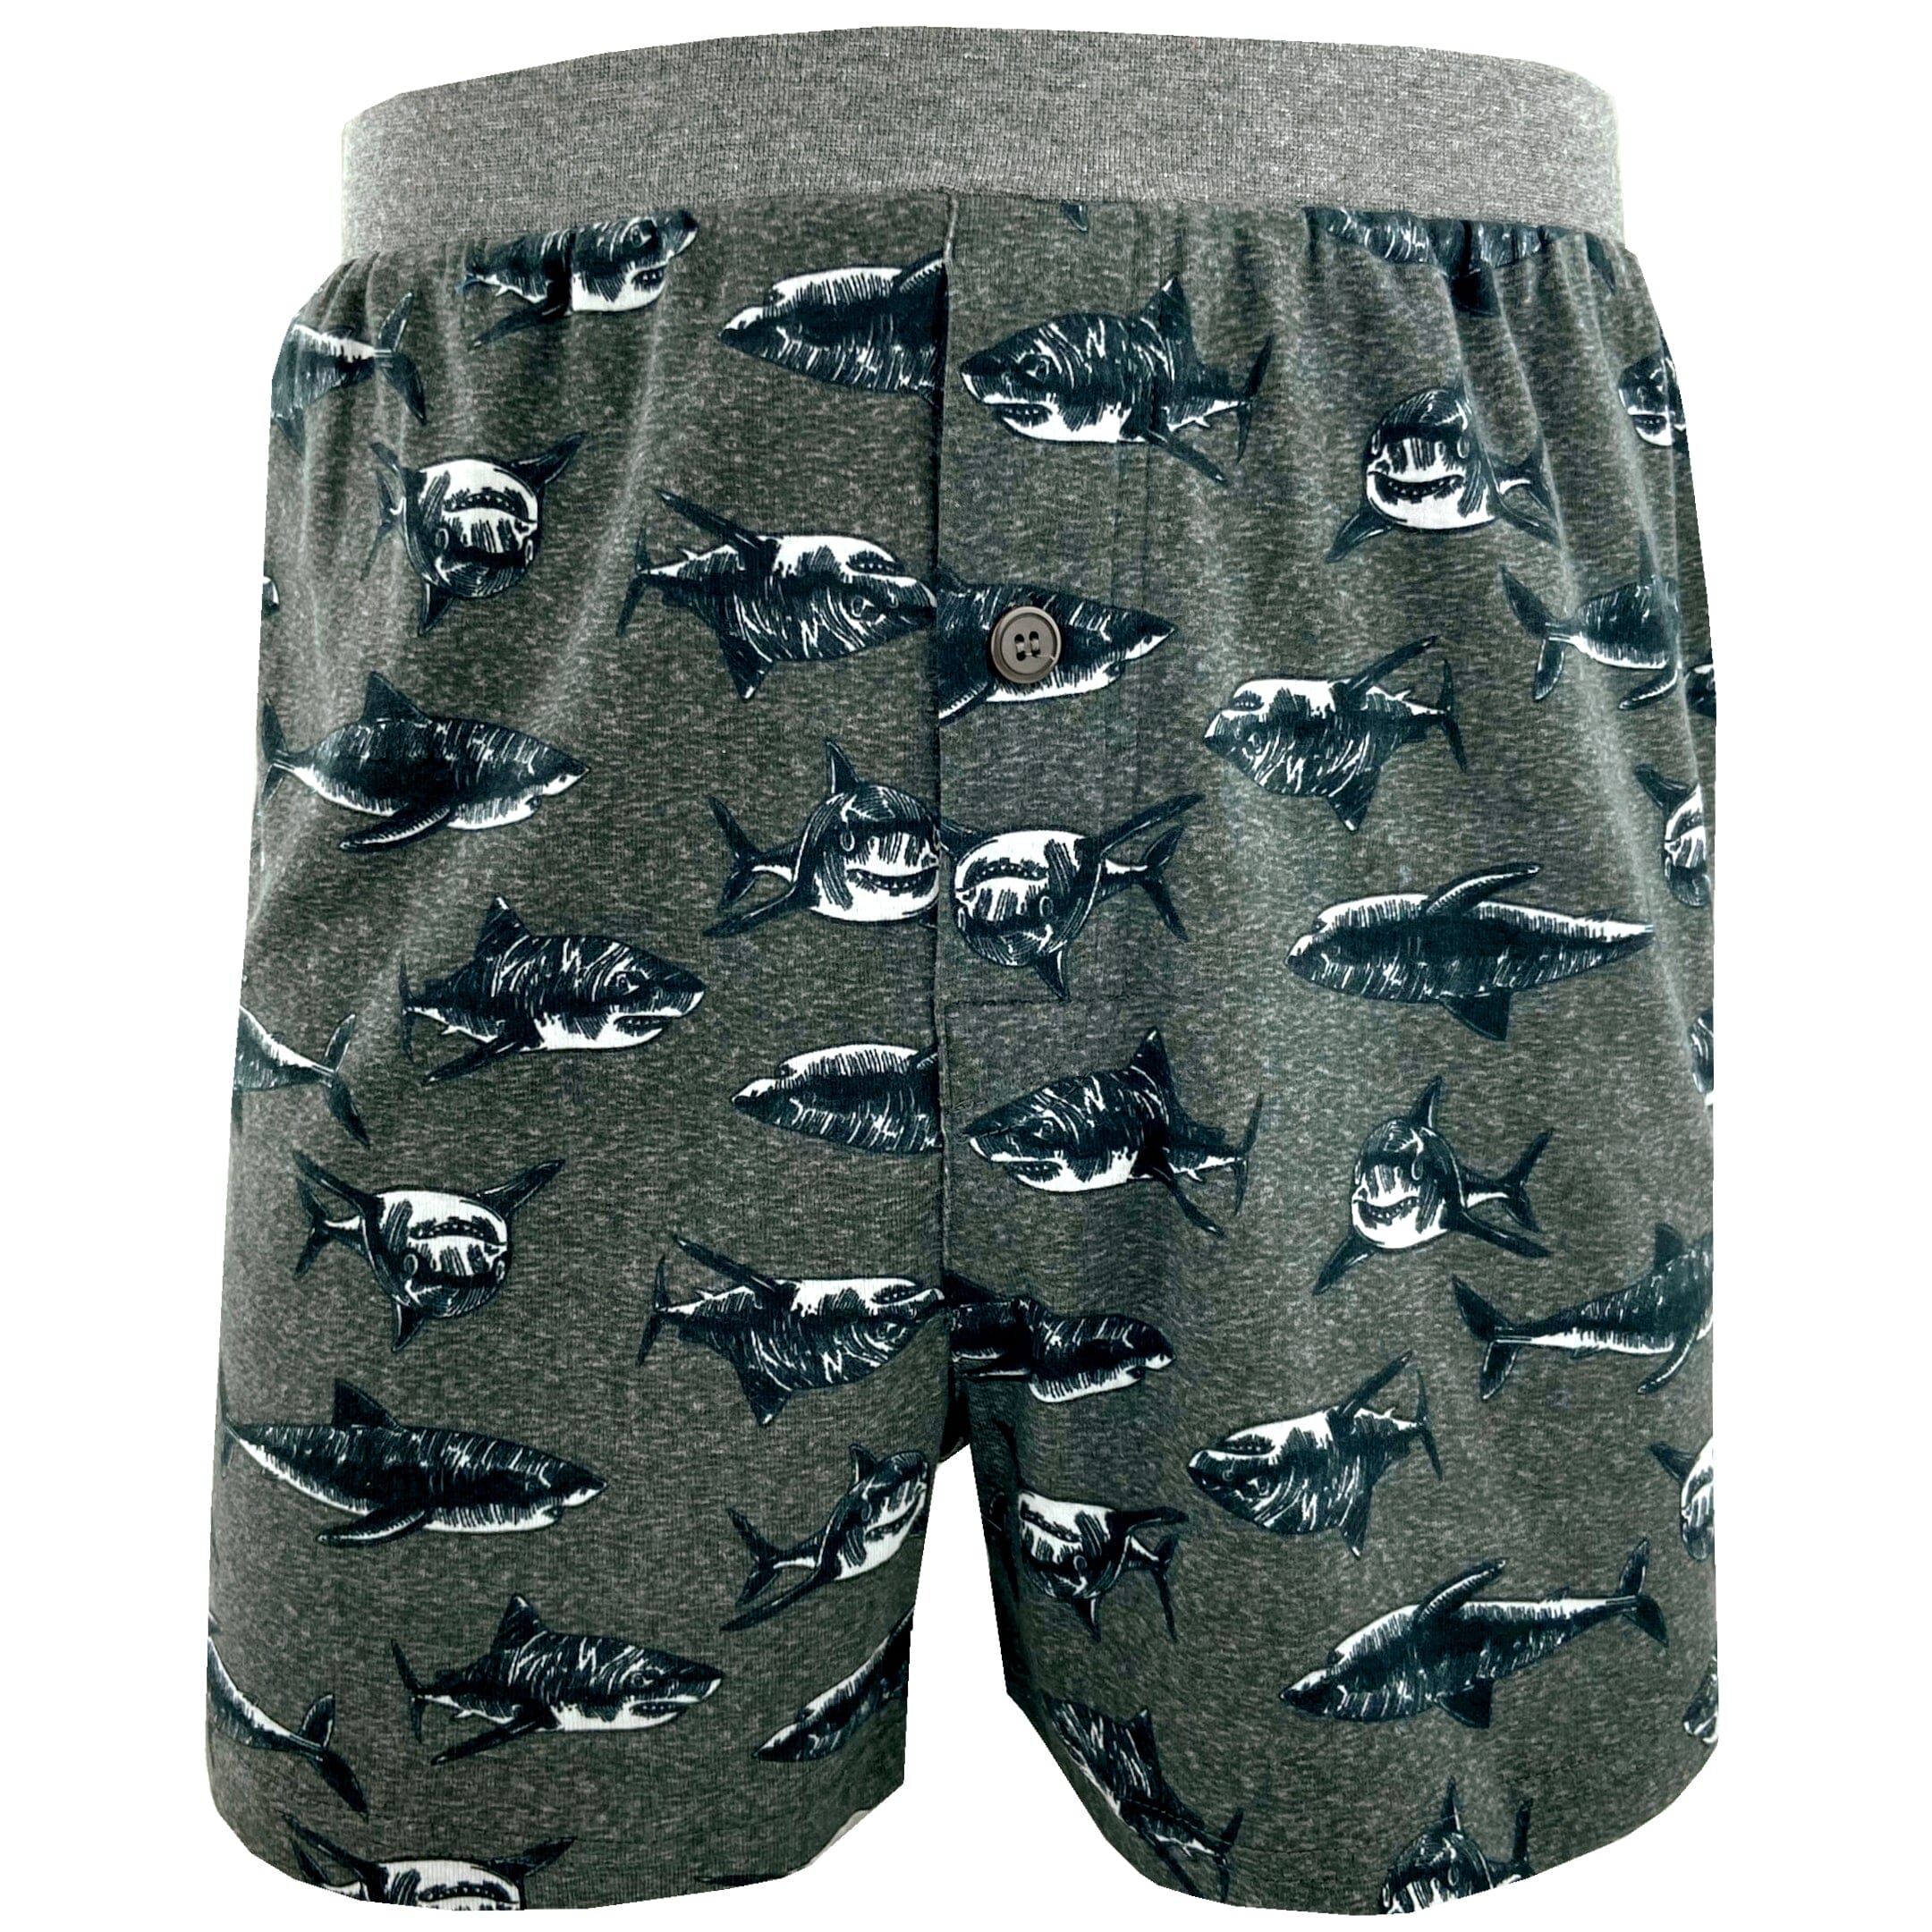 Men's Great White Shark All-Over Print Cotton Knit Boxer Pajama Shorts